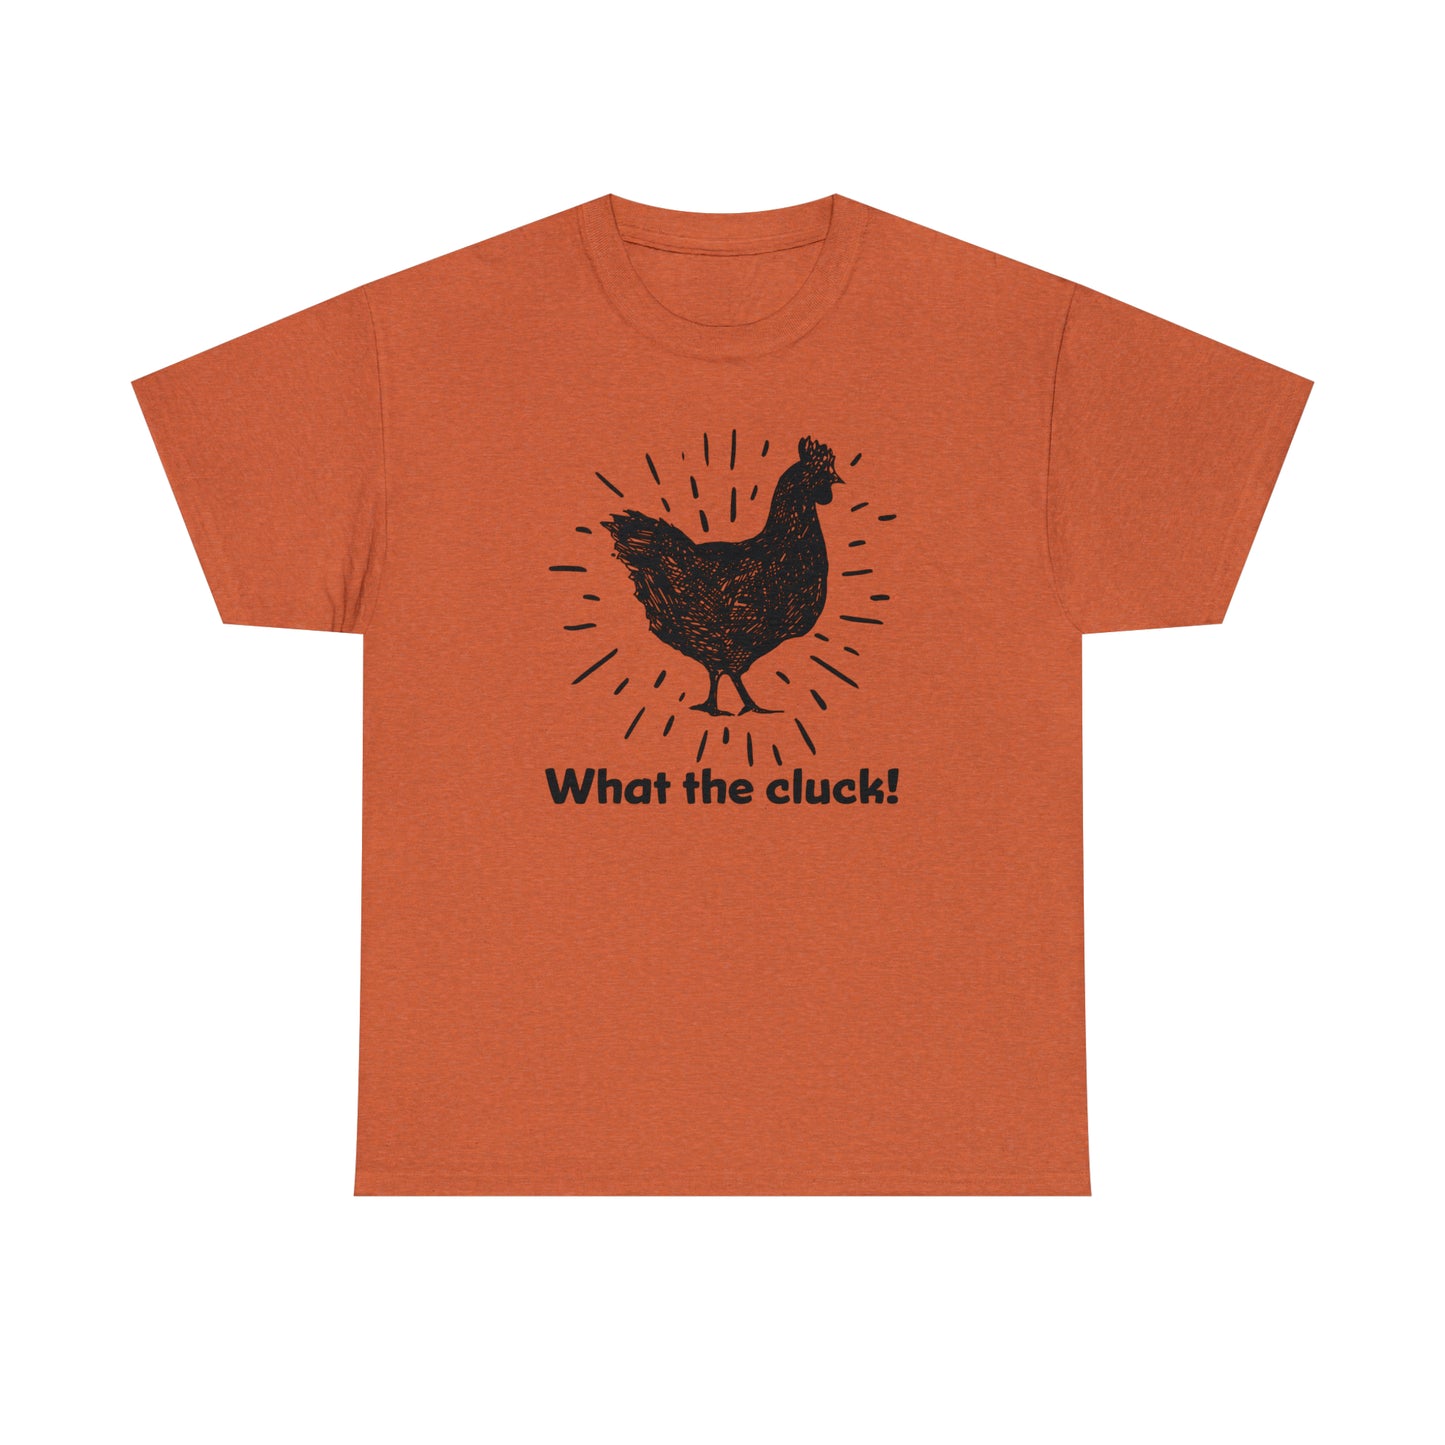 Funny Chicken T-Shirt For What The Cluck TShirt For Hen T Shirt For Farm Girl Shirt For Women T-Shirt For Chicken Owner Tee For Fun Chicken Gift